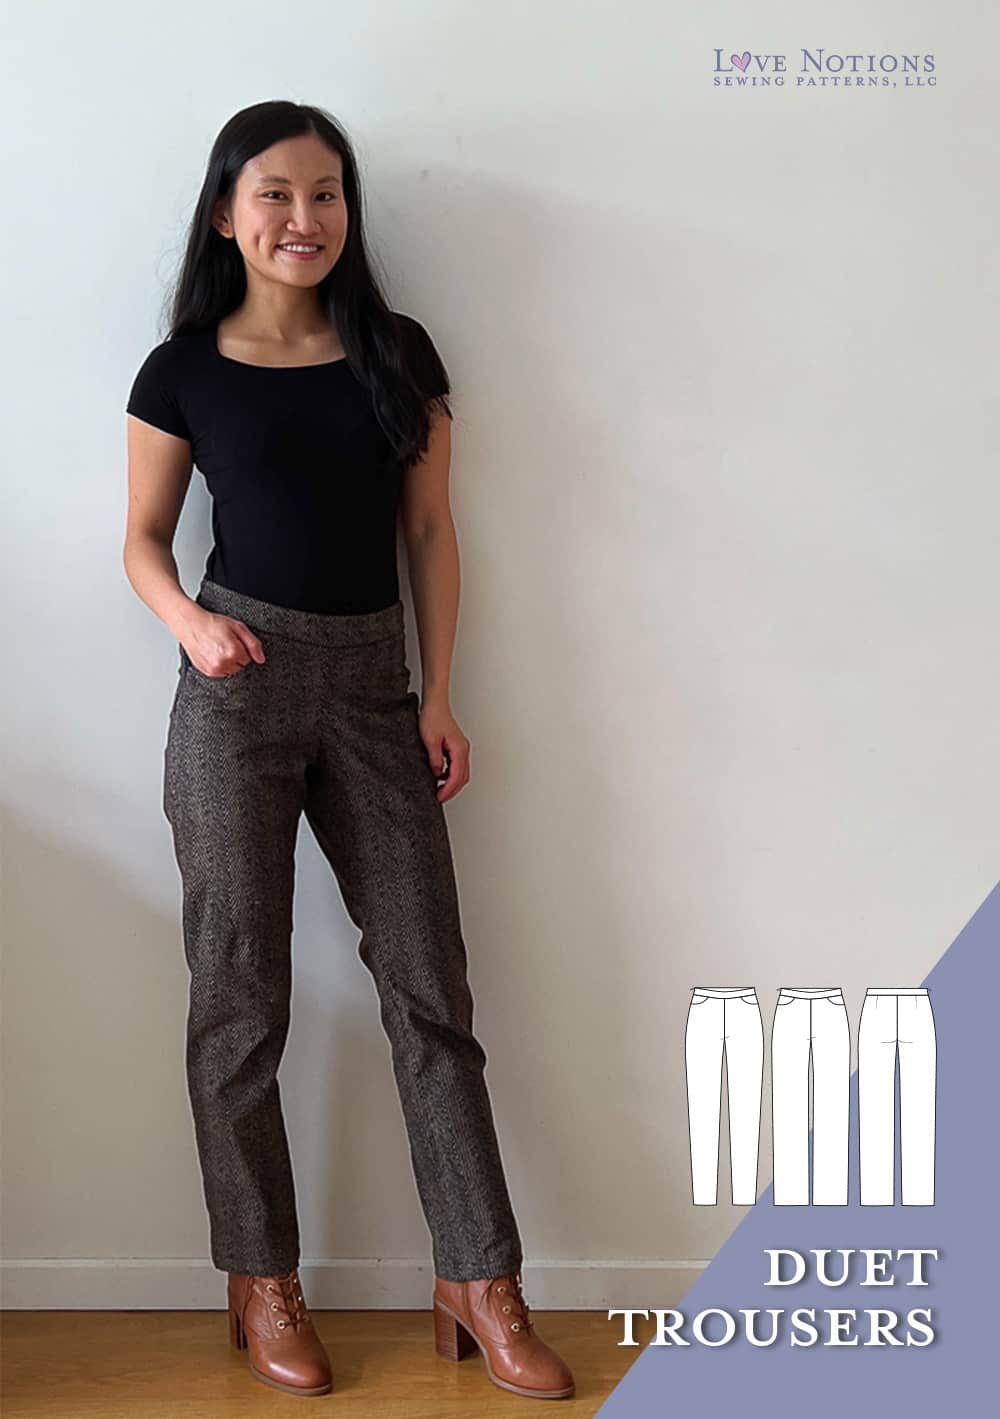 Duet Trousers Course - Love Notions Sewing Patterns